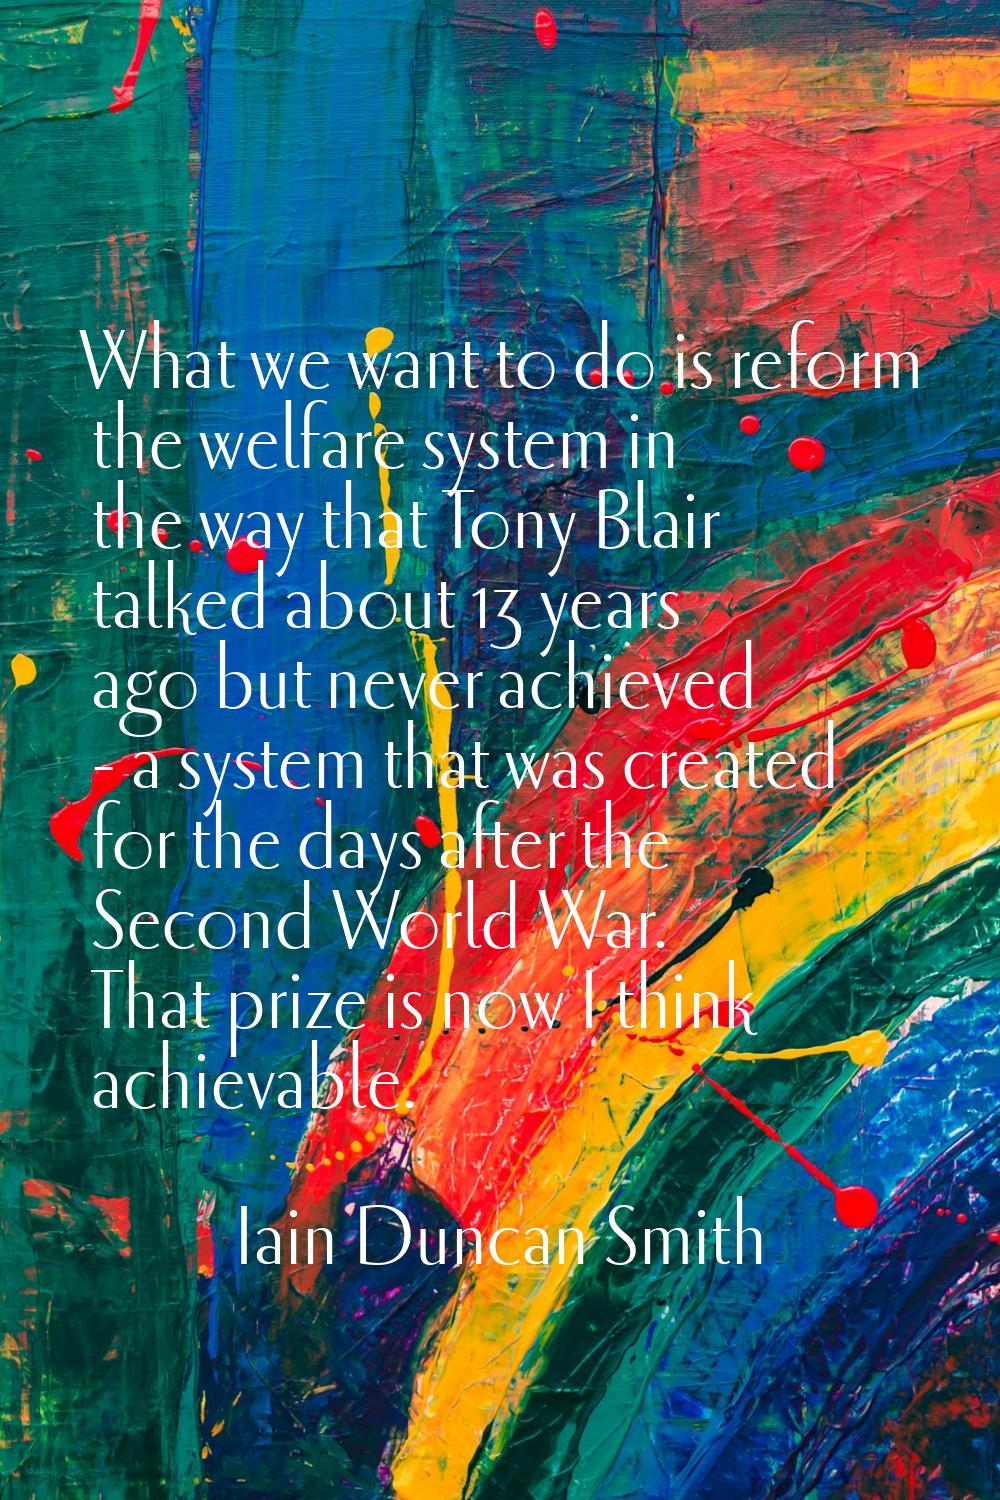 What we want to do is reform the welfare system in the way that Tony Blair talked about 13 years ag